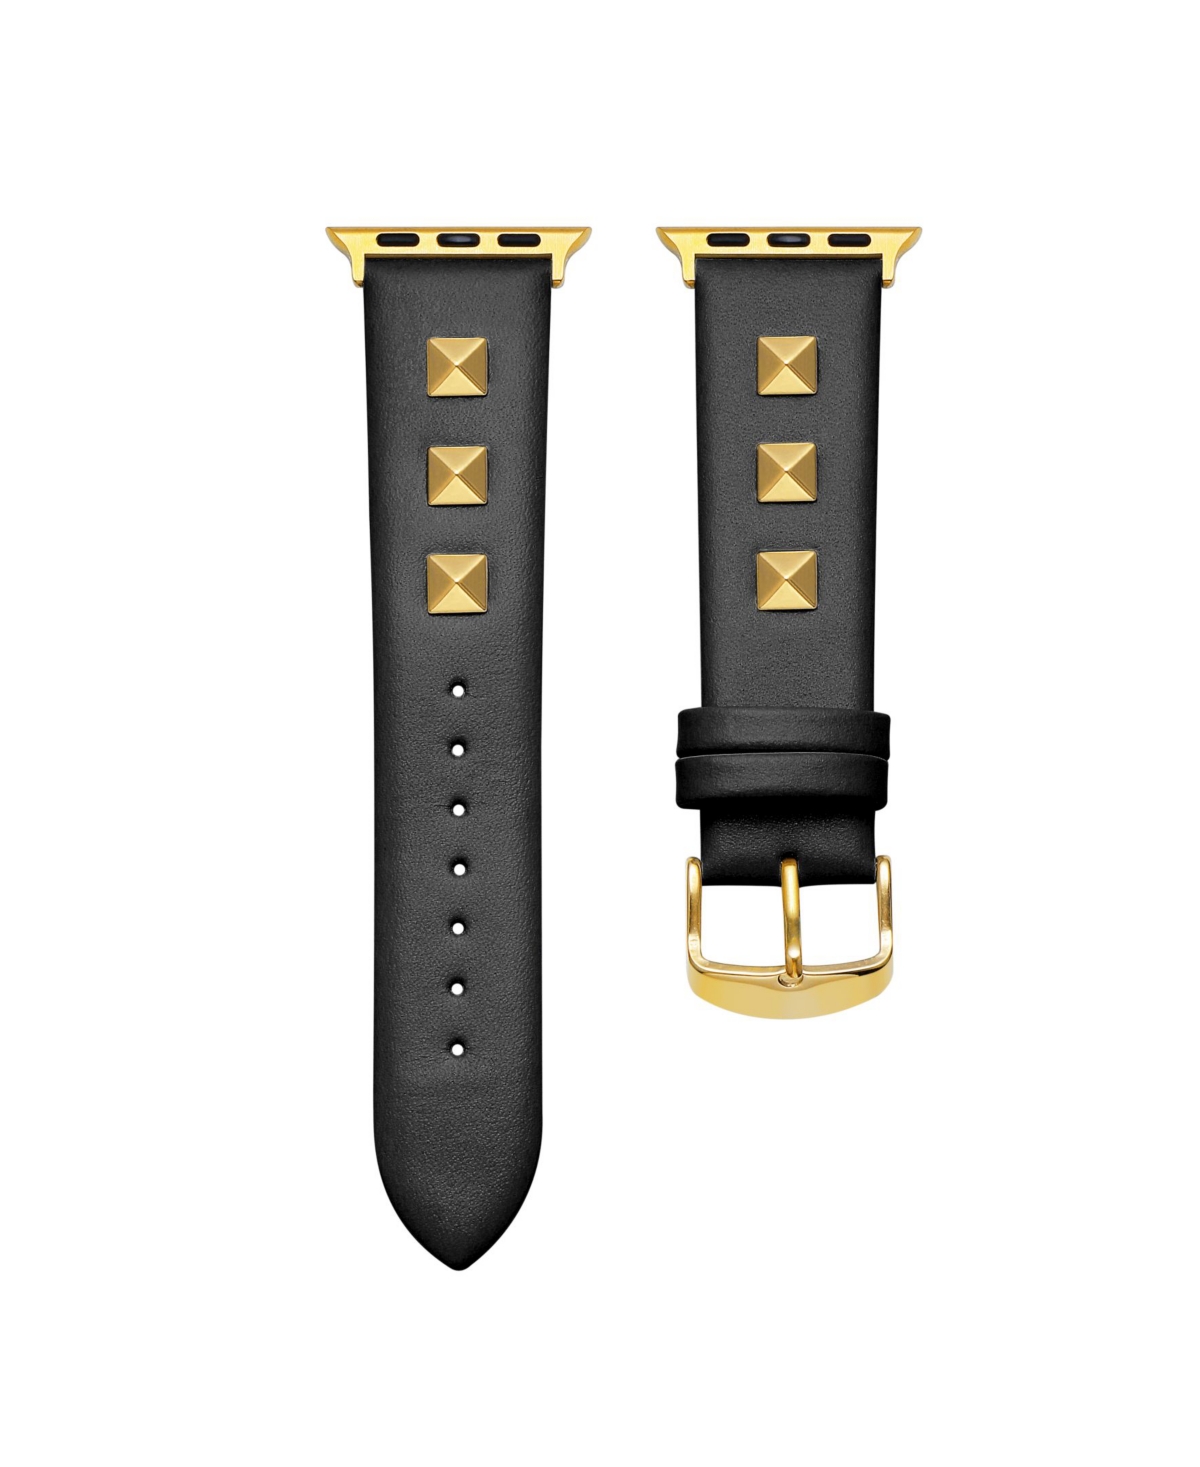 Rebel Black Genuine Leather and Stud Band for Apple Watch, 38mm-40mm - Black, Gold-tone